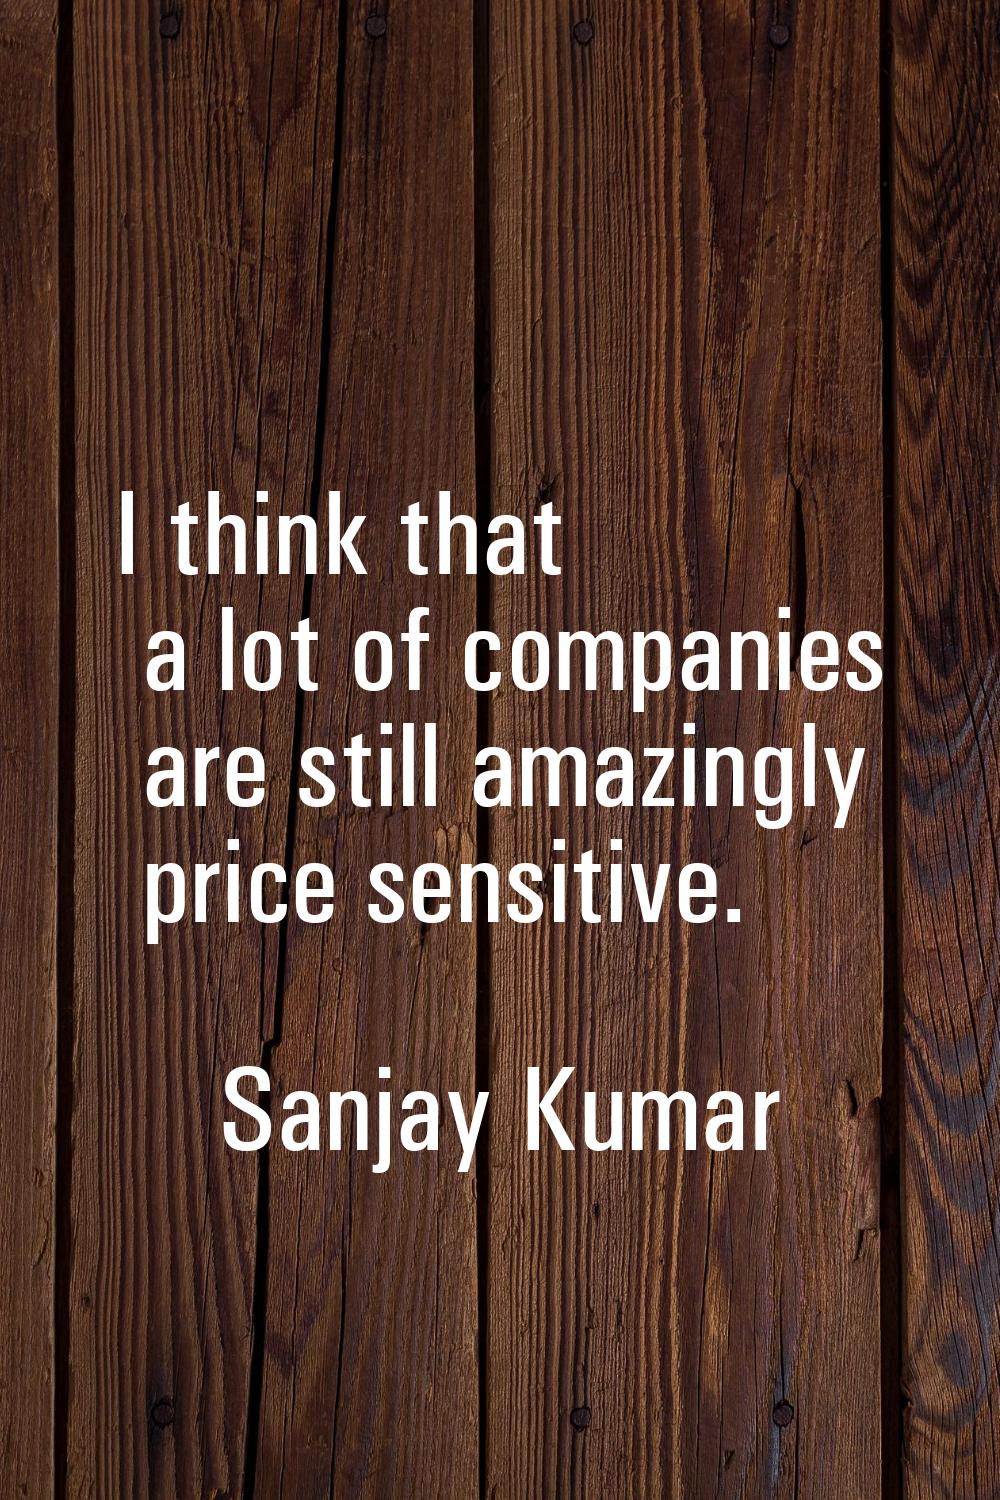 I think that a lot of companies are still amazingly price sensitive.